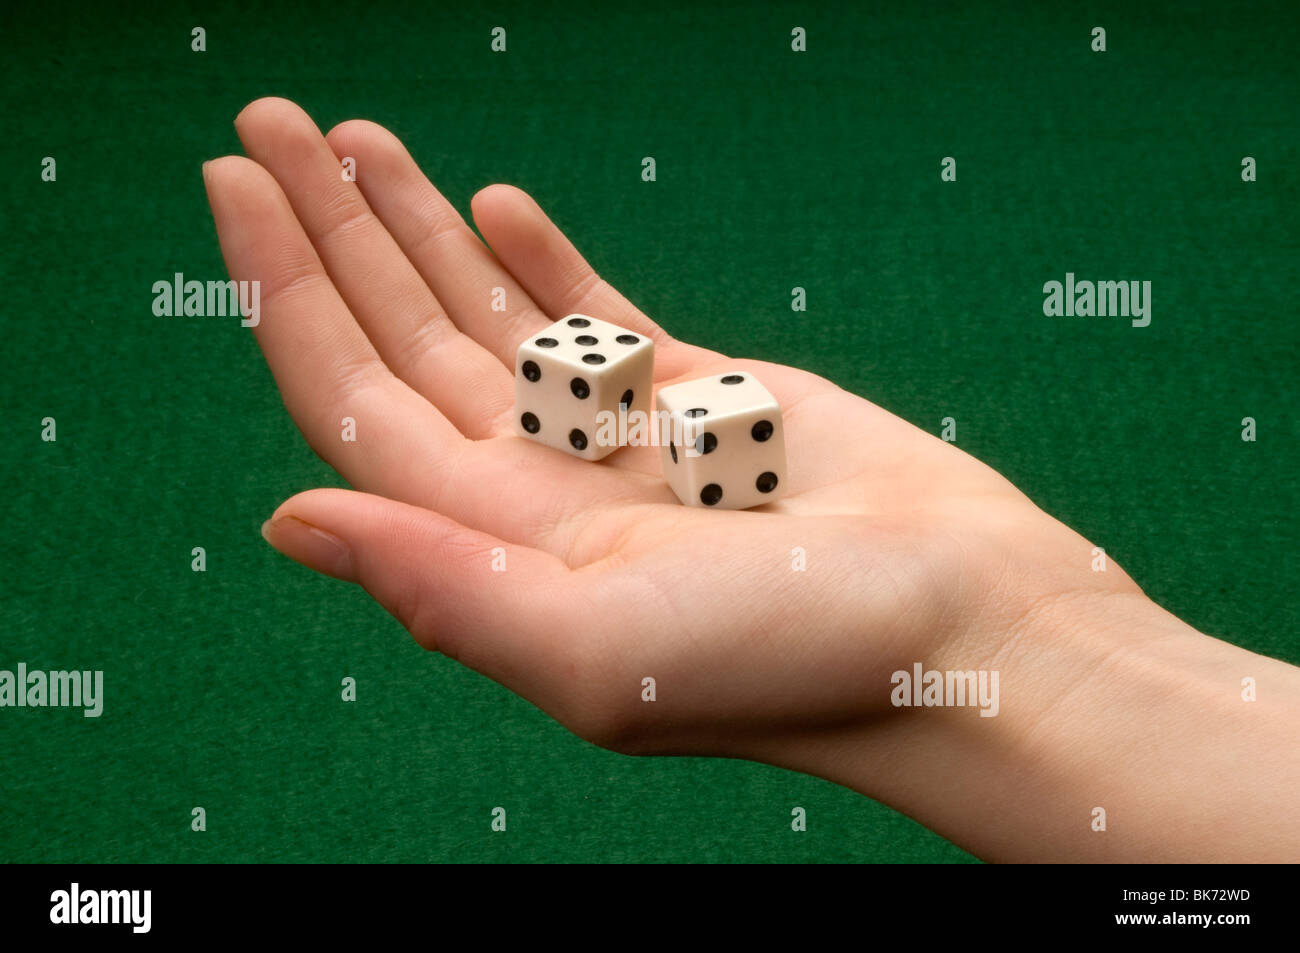 hand holding pair of dice Stock Photo